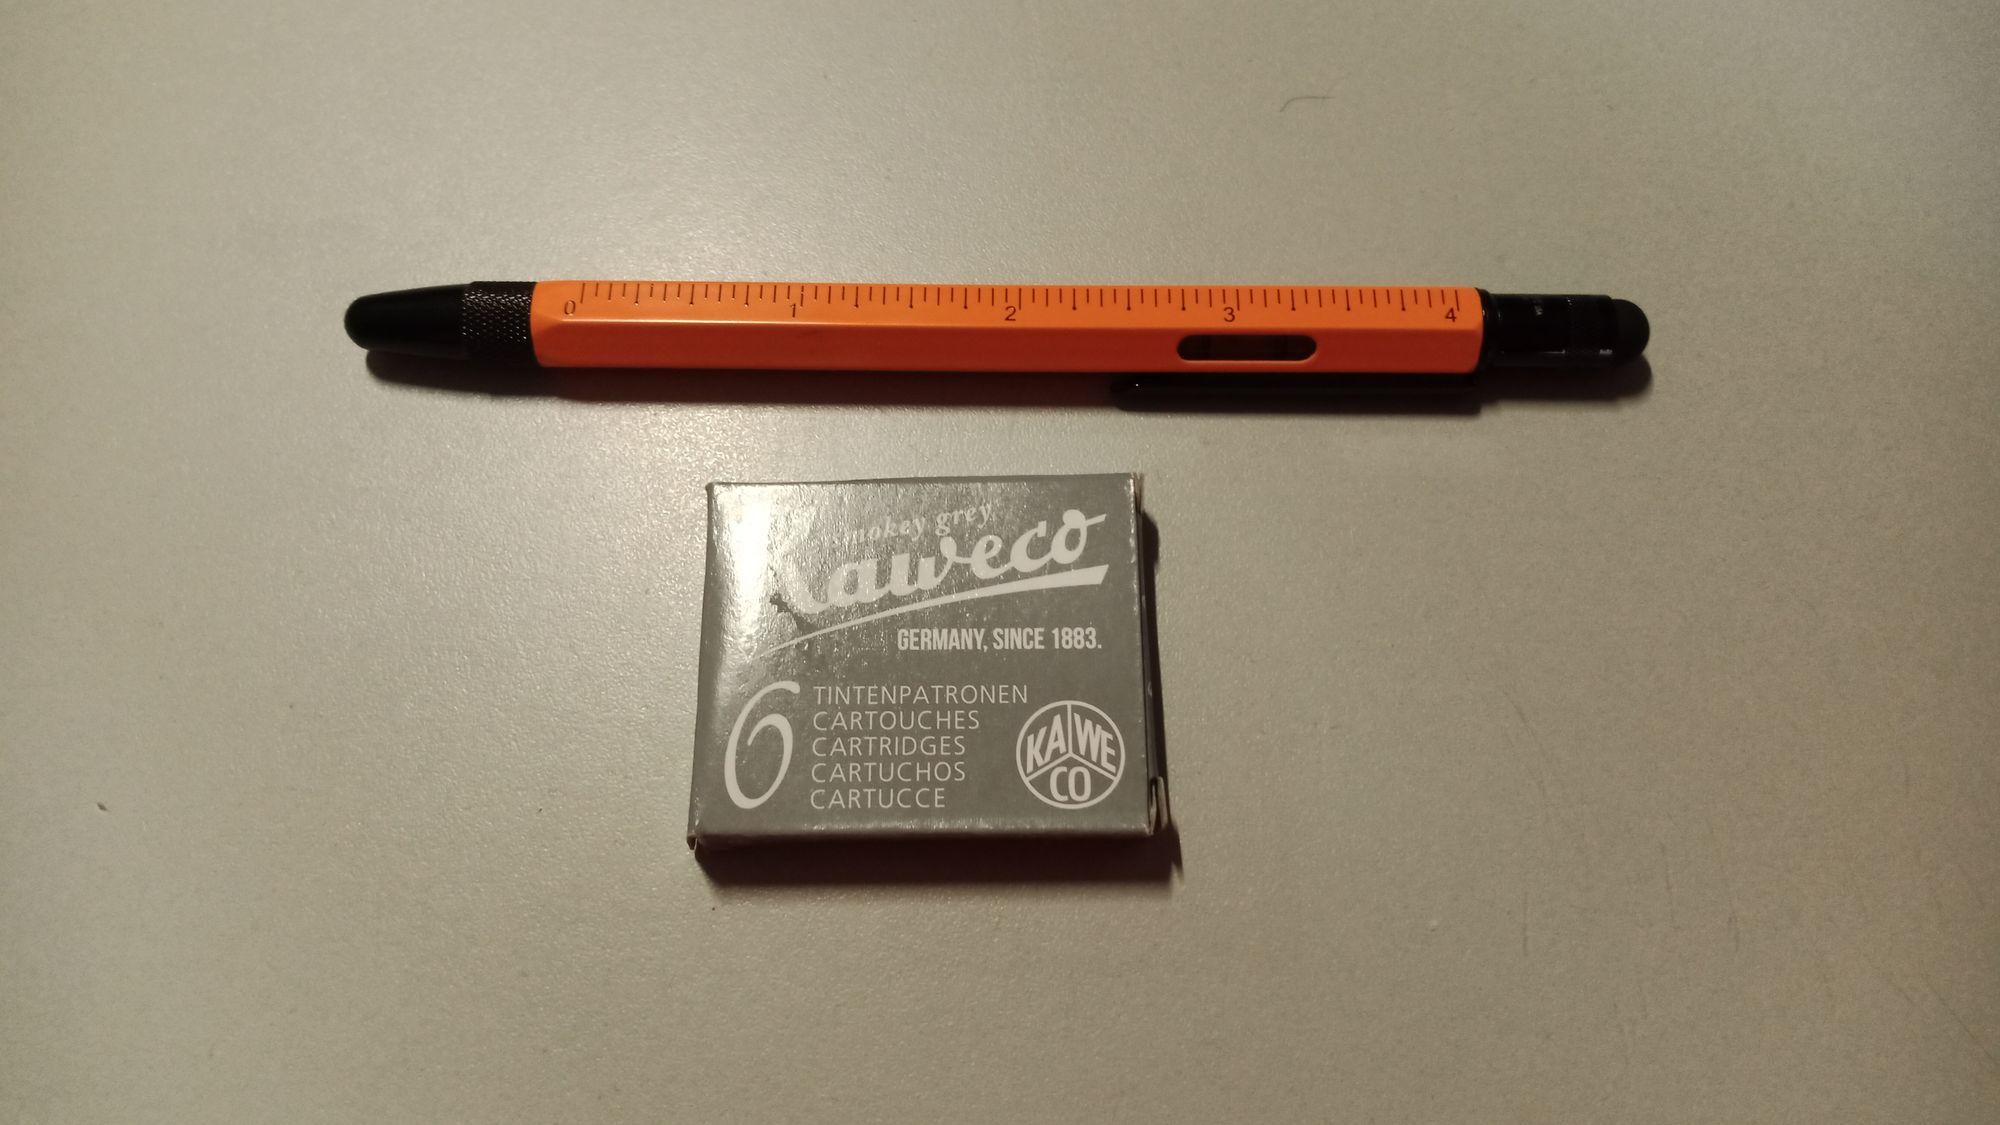 The pen and a box of Kaweco ink cartridges